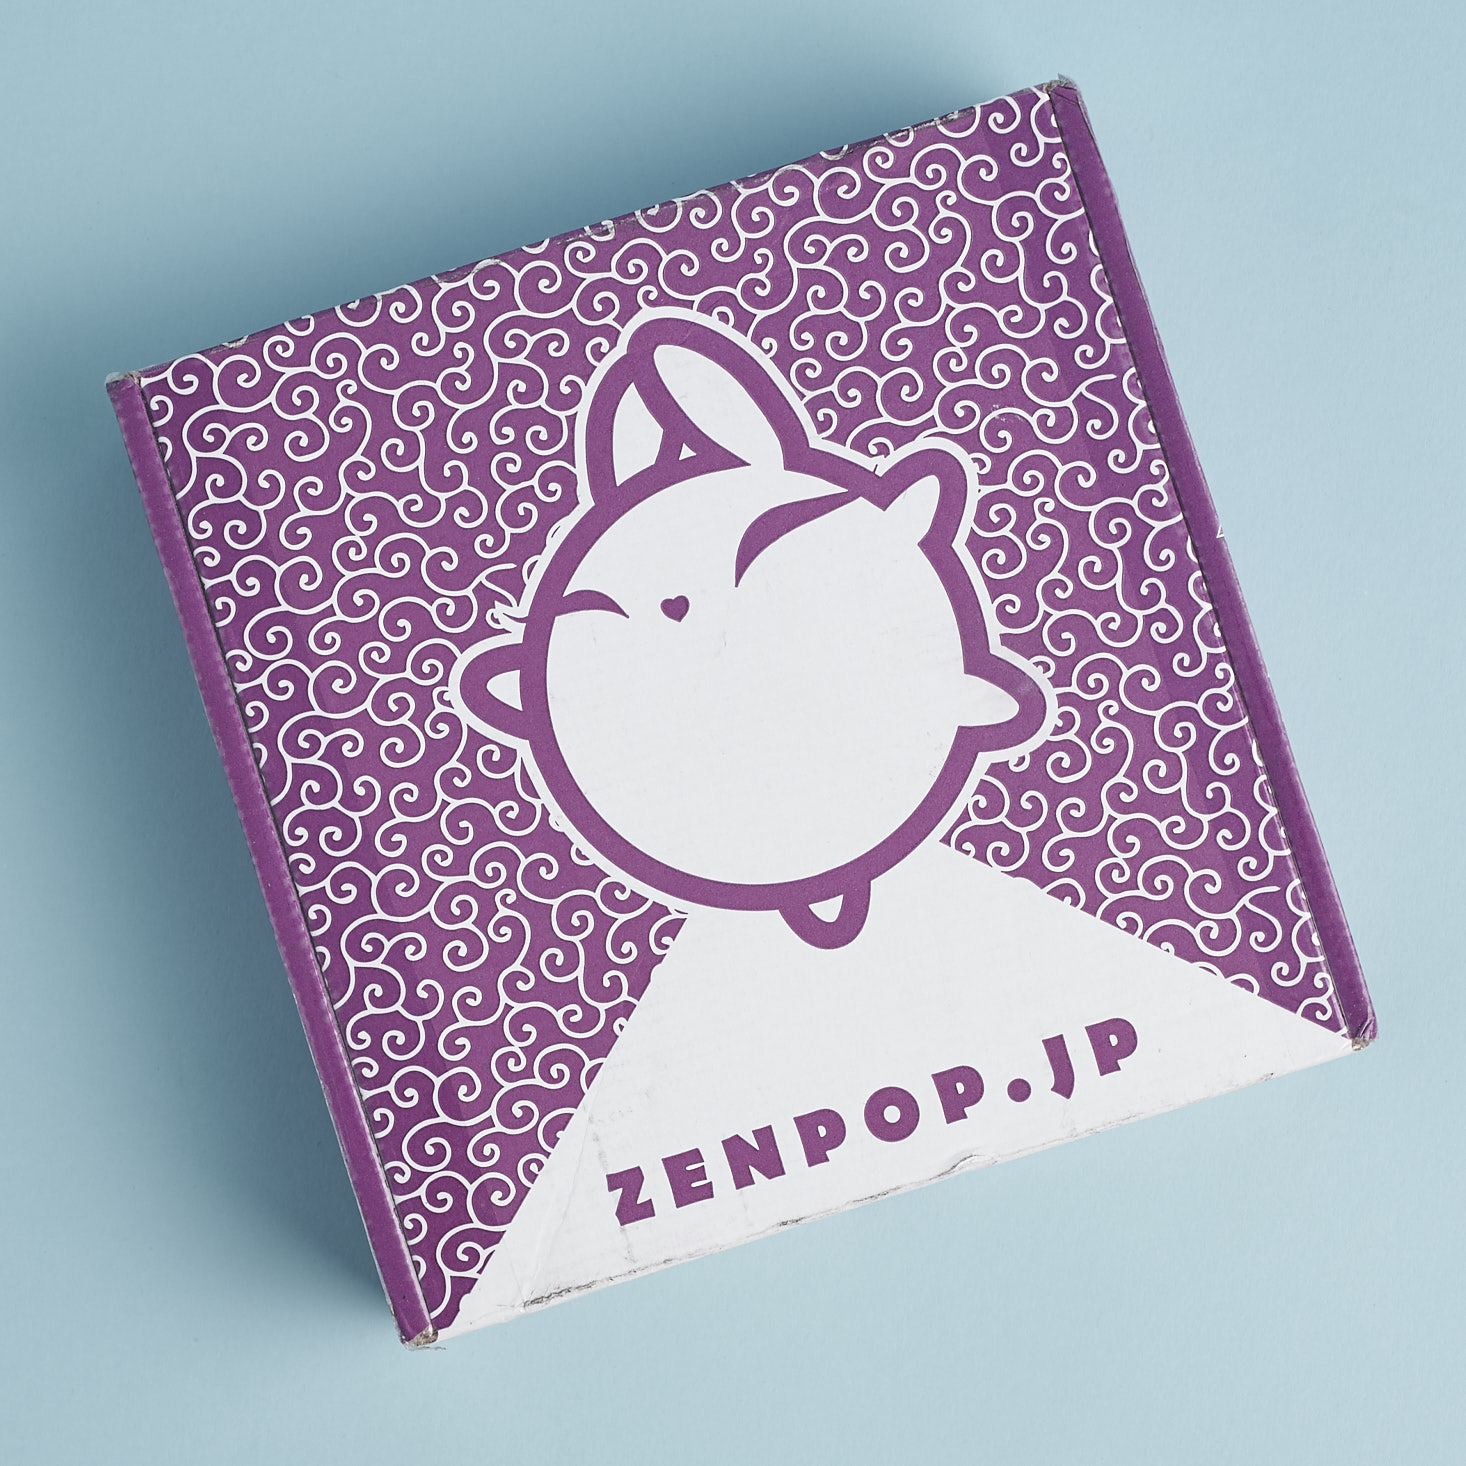 ZenPop Japanese Stationery Pack Review – March 2018